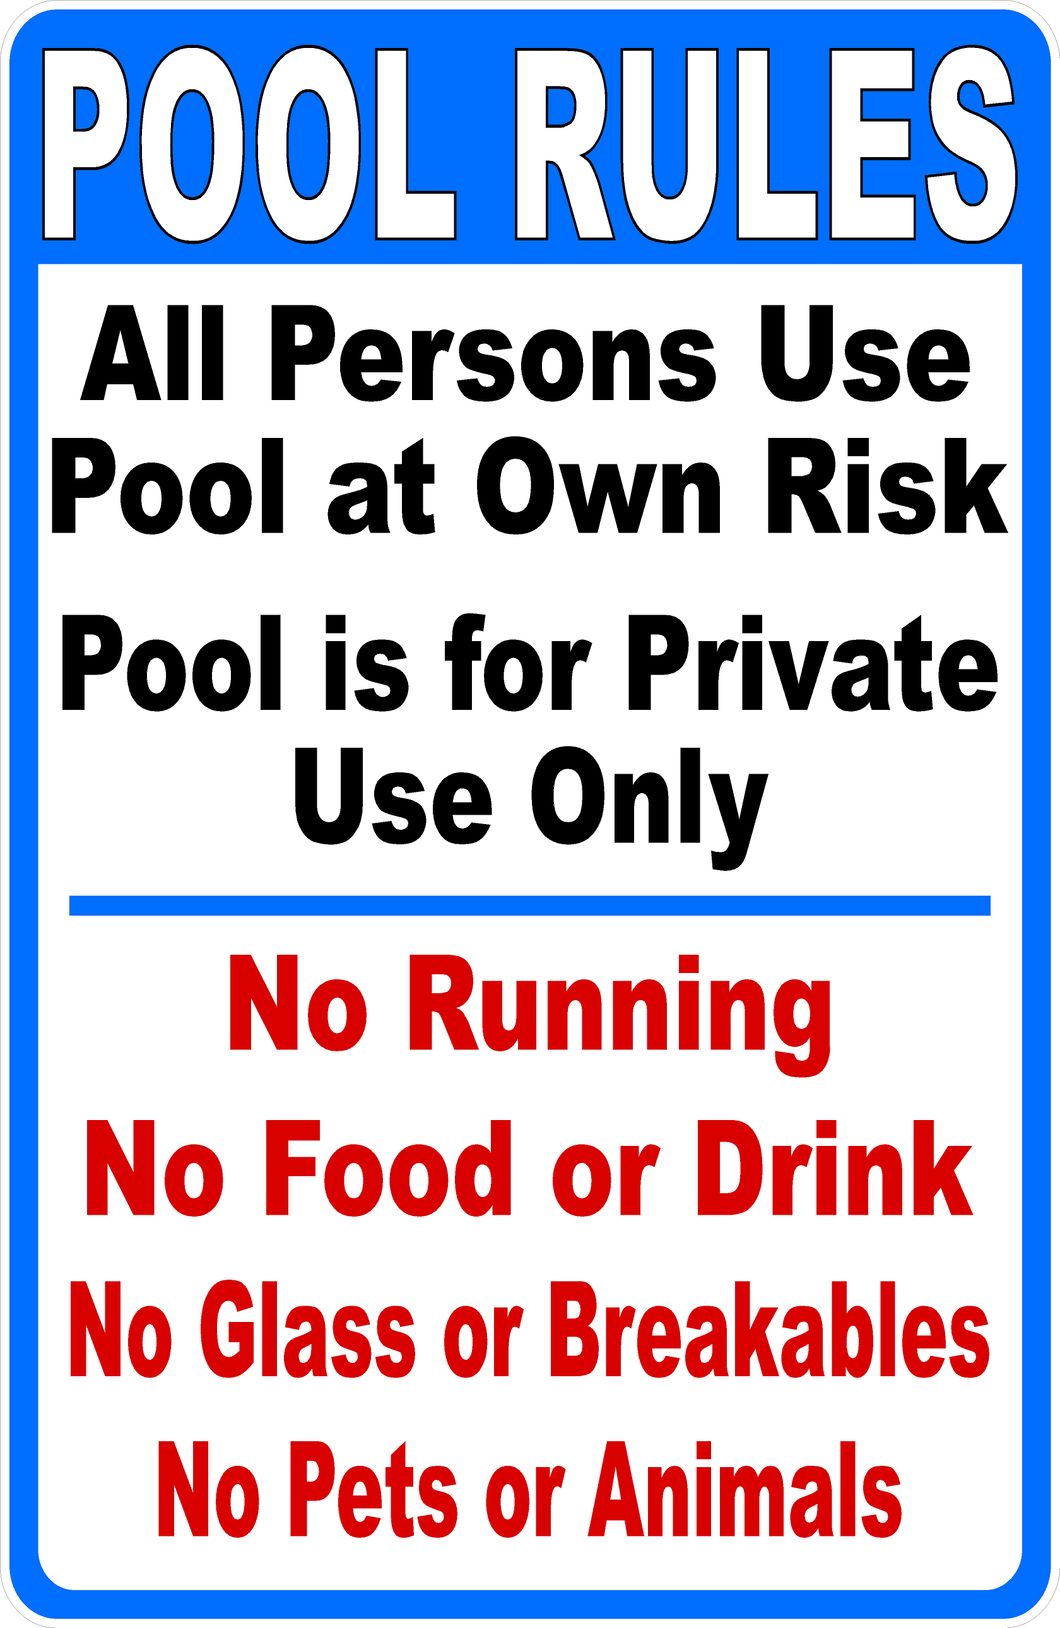 Pool Rules All Persons Use at Own Risk Sign